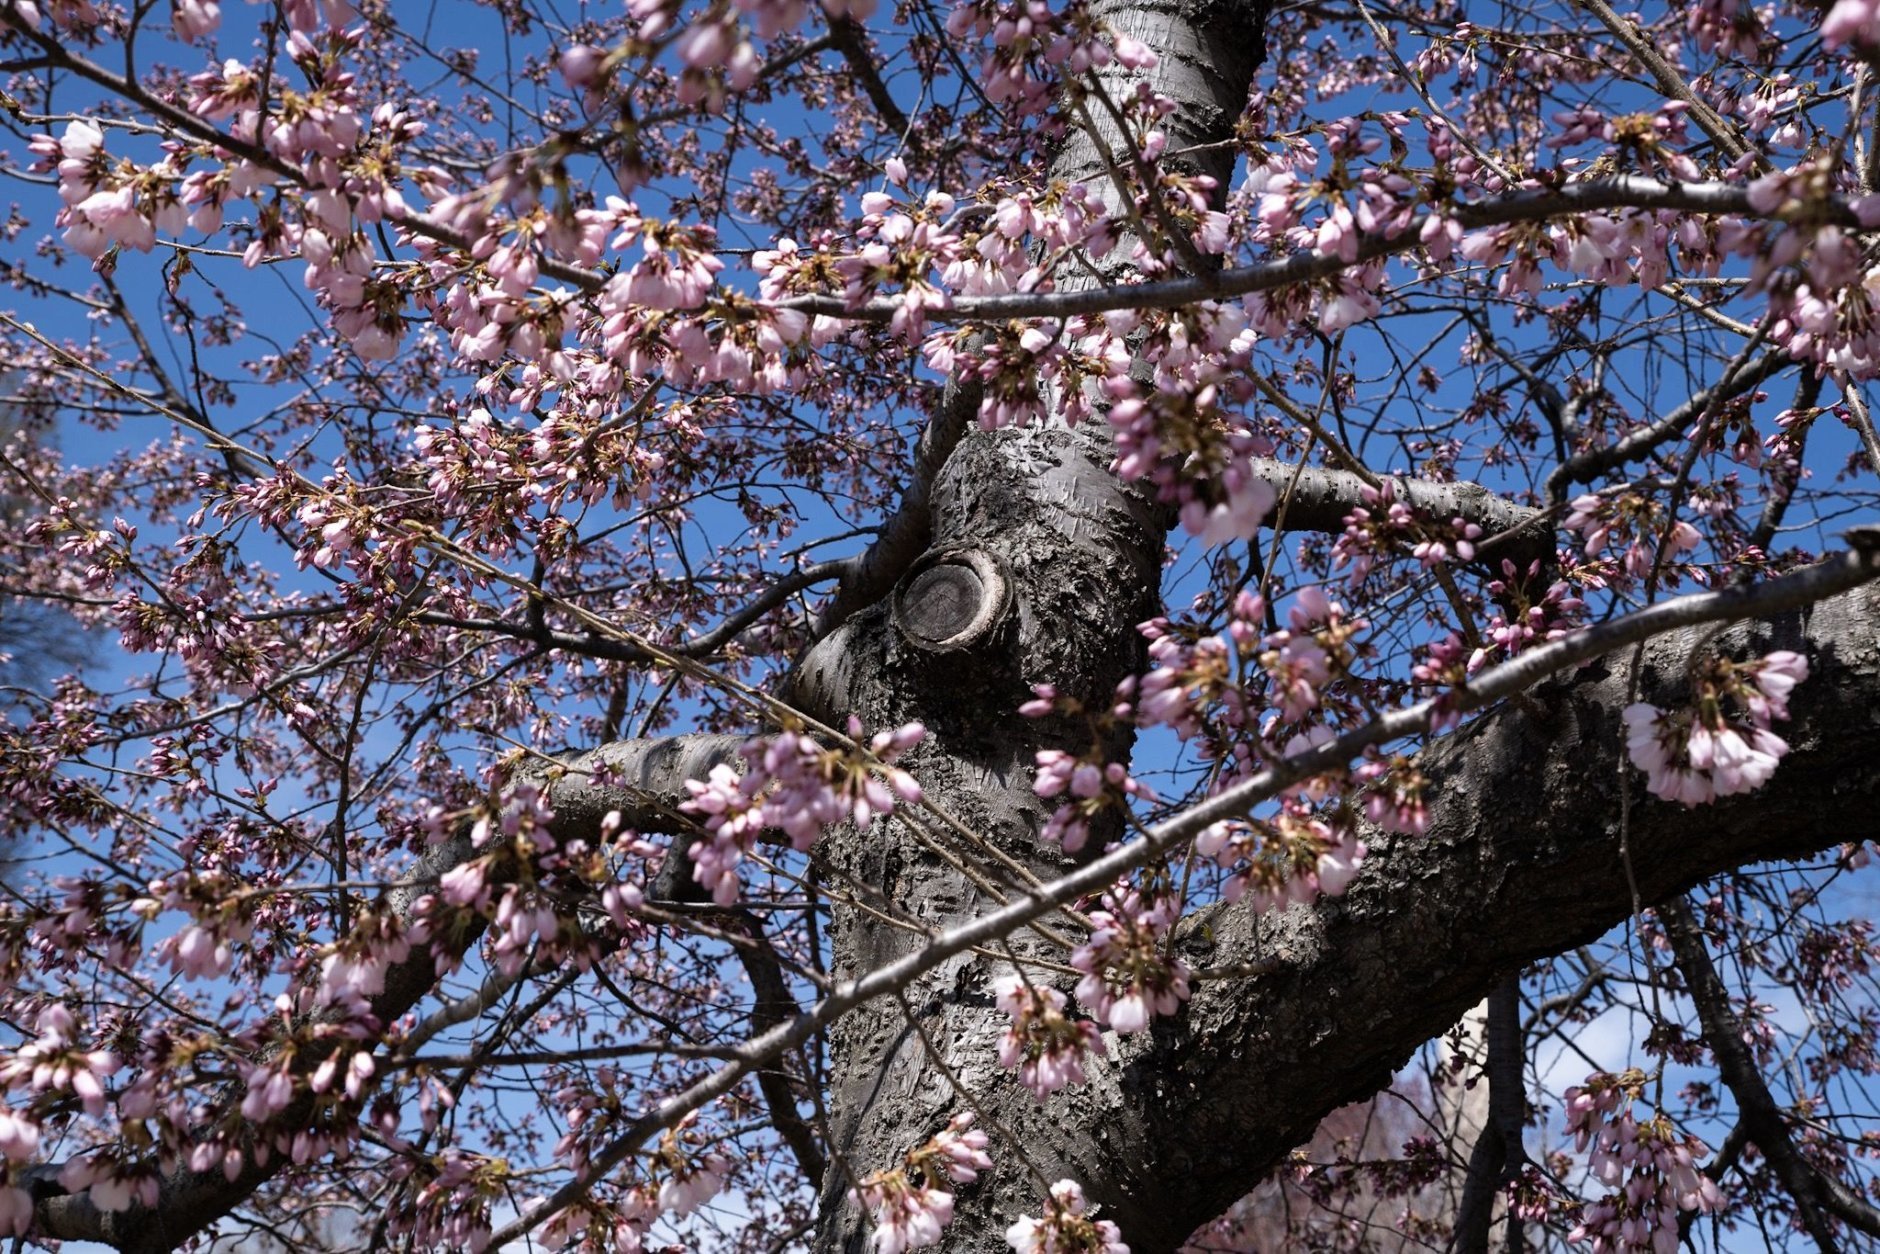 One of the hundreds of cherry trees encircling the Tidal Basin just before peak bloom on March 28 (WTOP/Alejandro Alvarez)